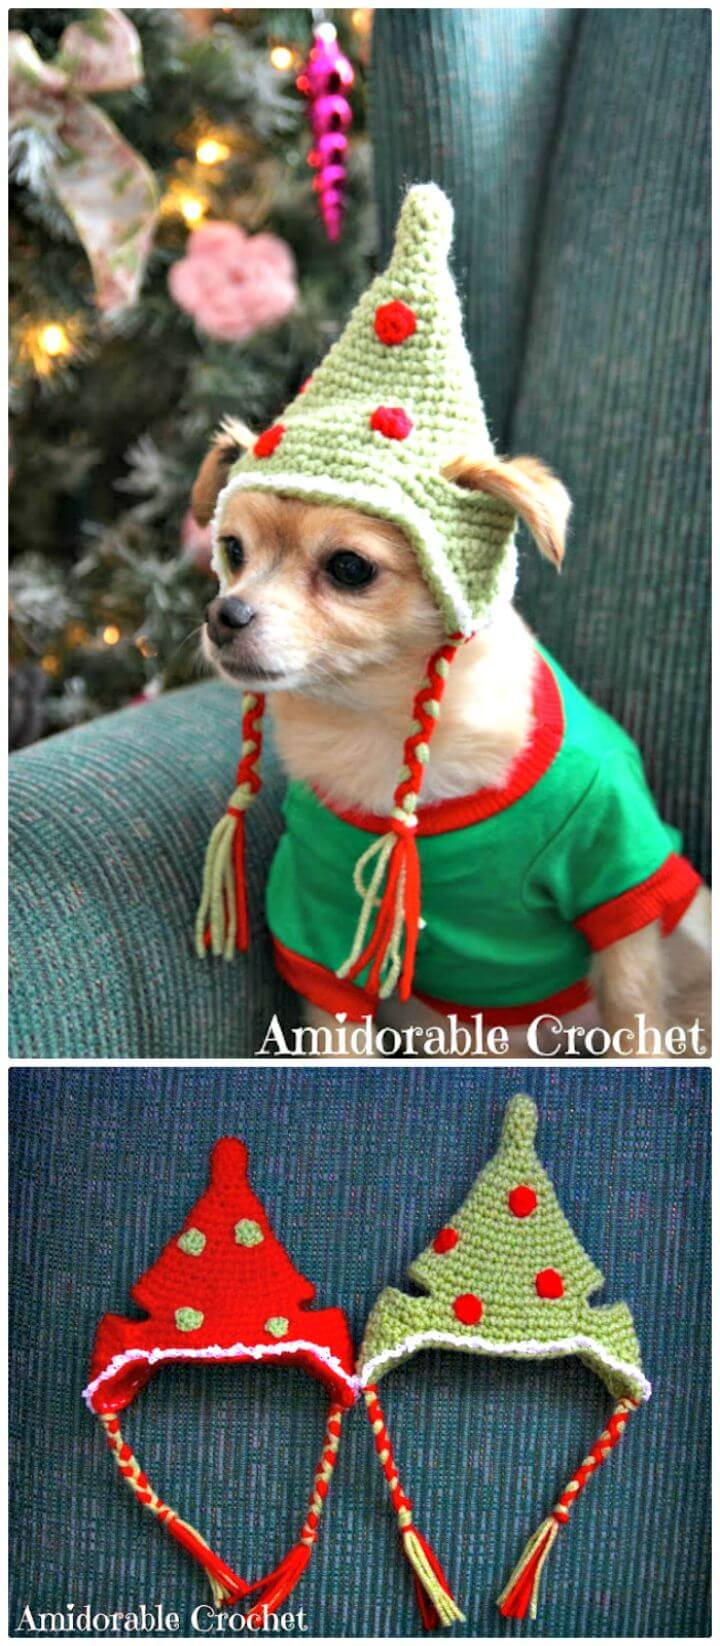 Puppy Dog Crochet Hat Pattern 26 Free Crochet Patterns For Pets To Make Their Life Easier Diy